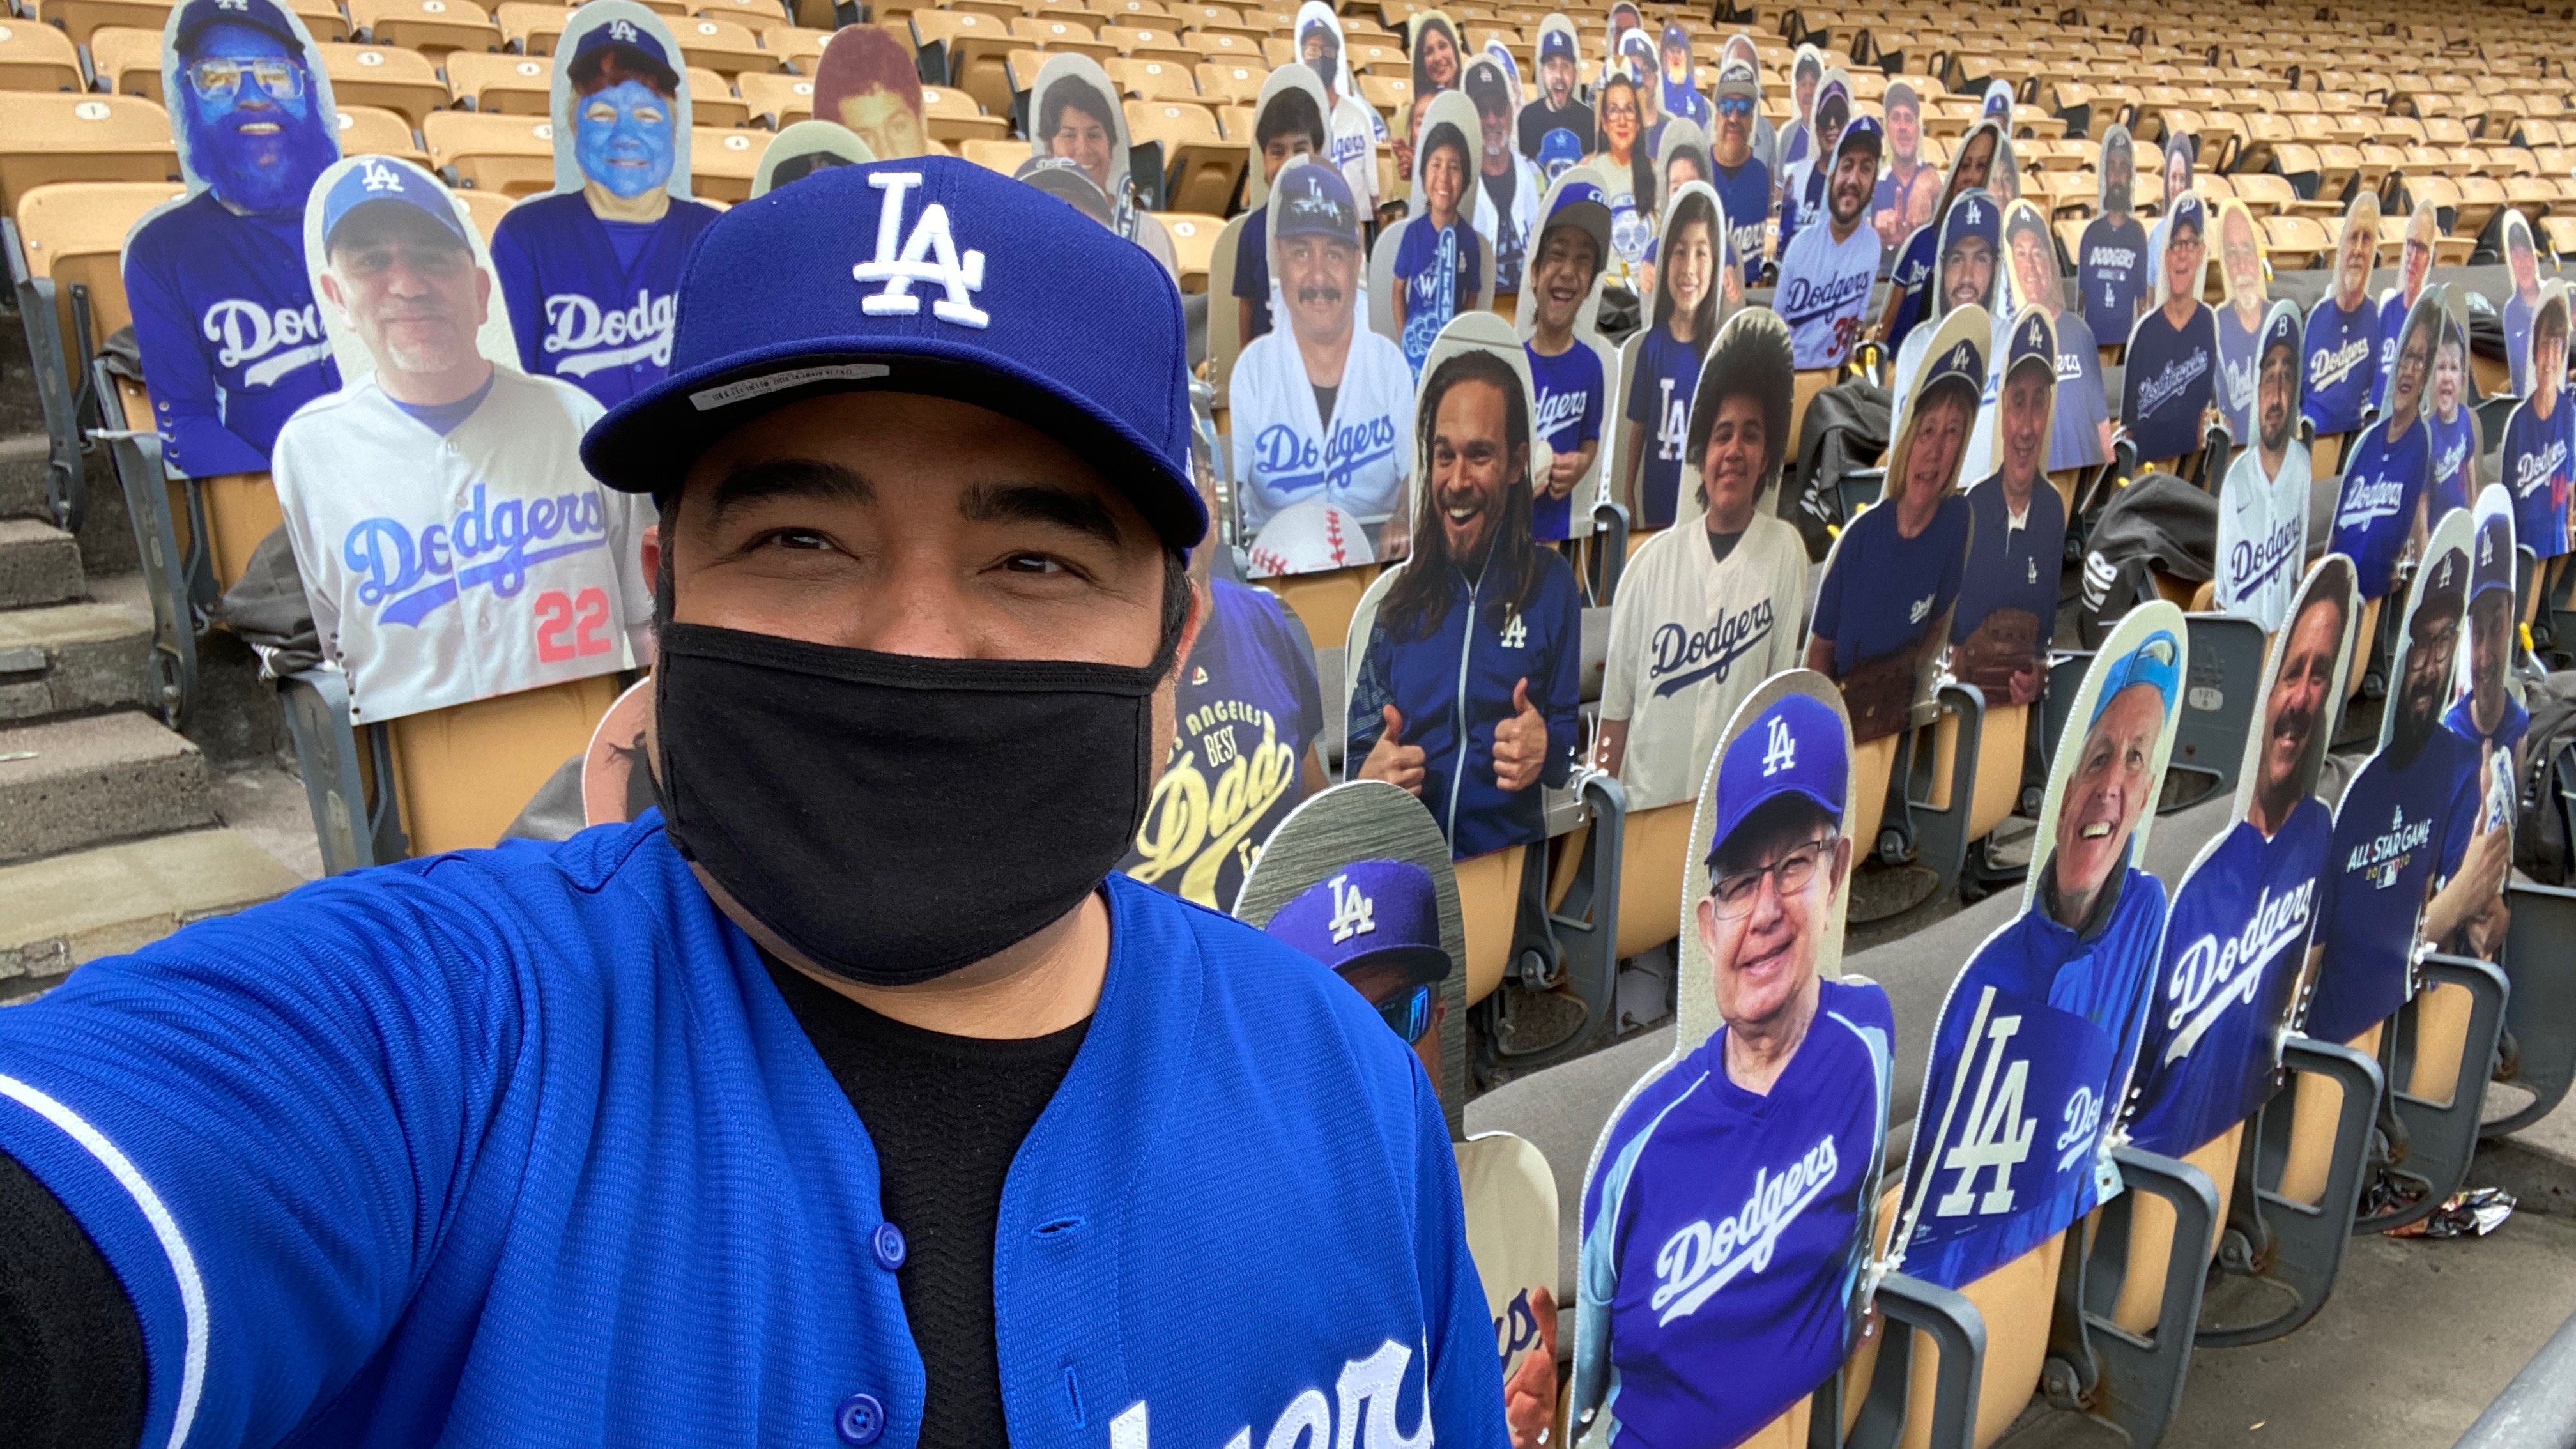 whats bags can you bring to dodger stadium｜TikTok Search